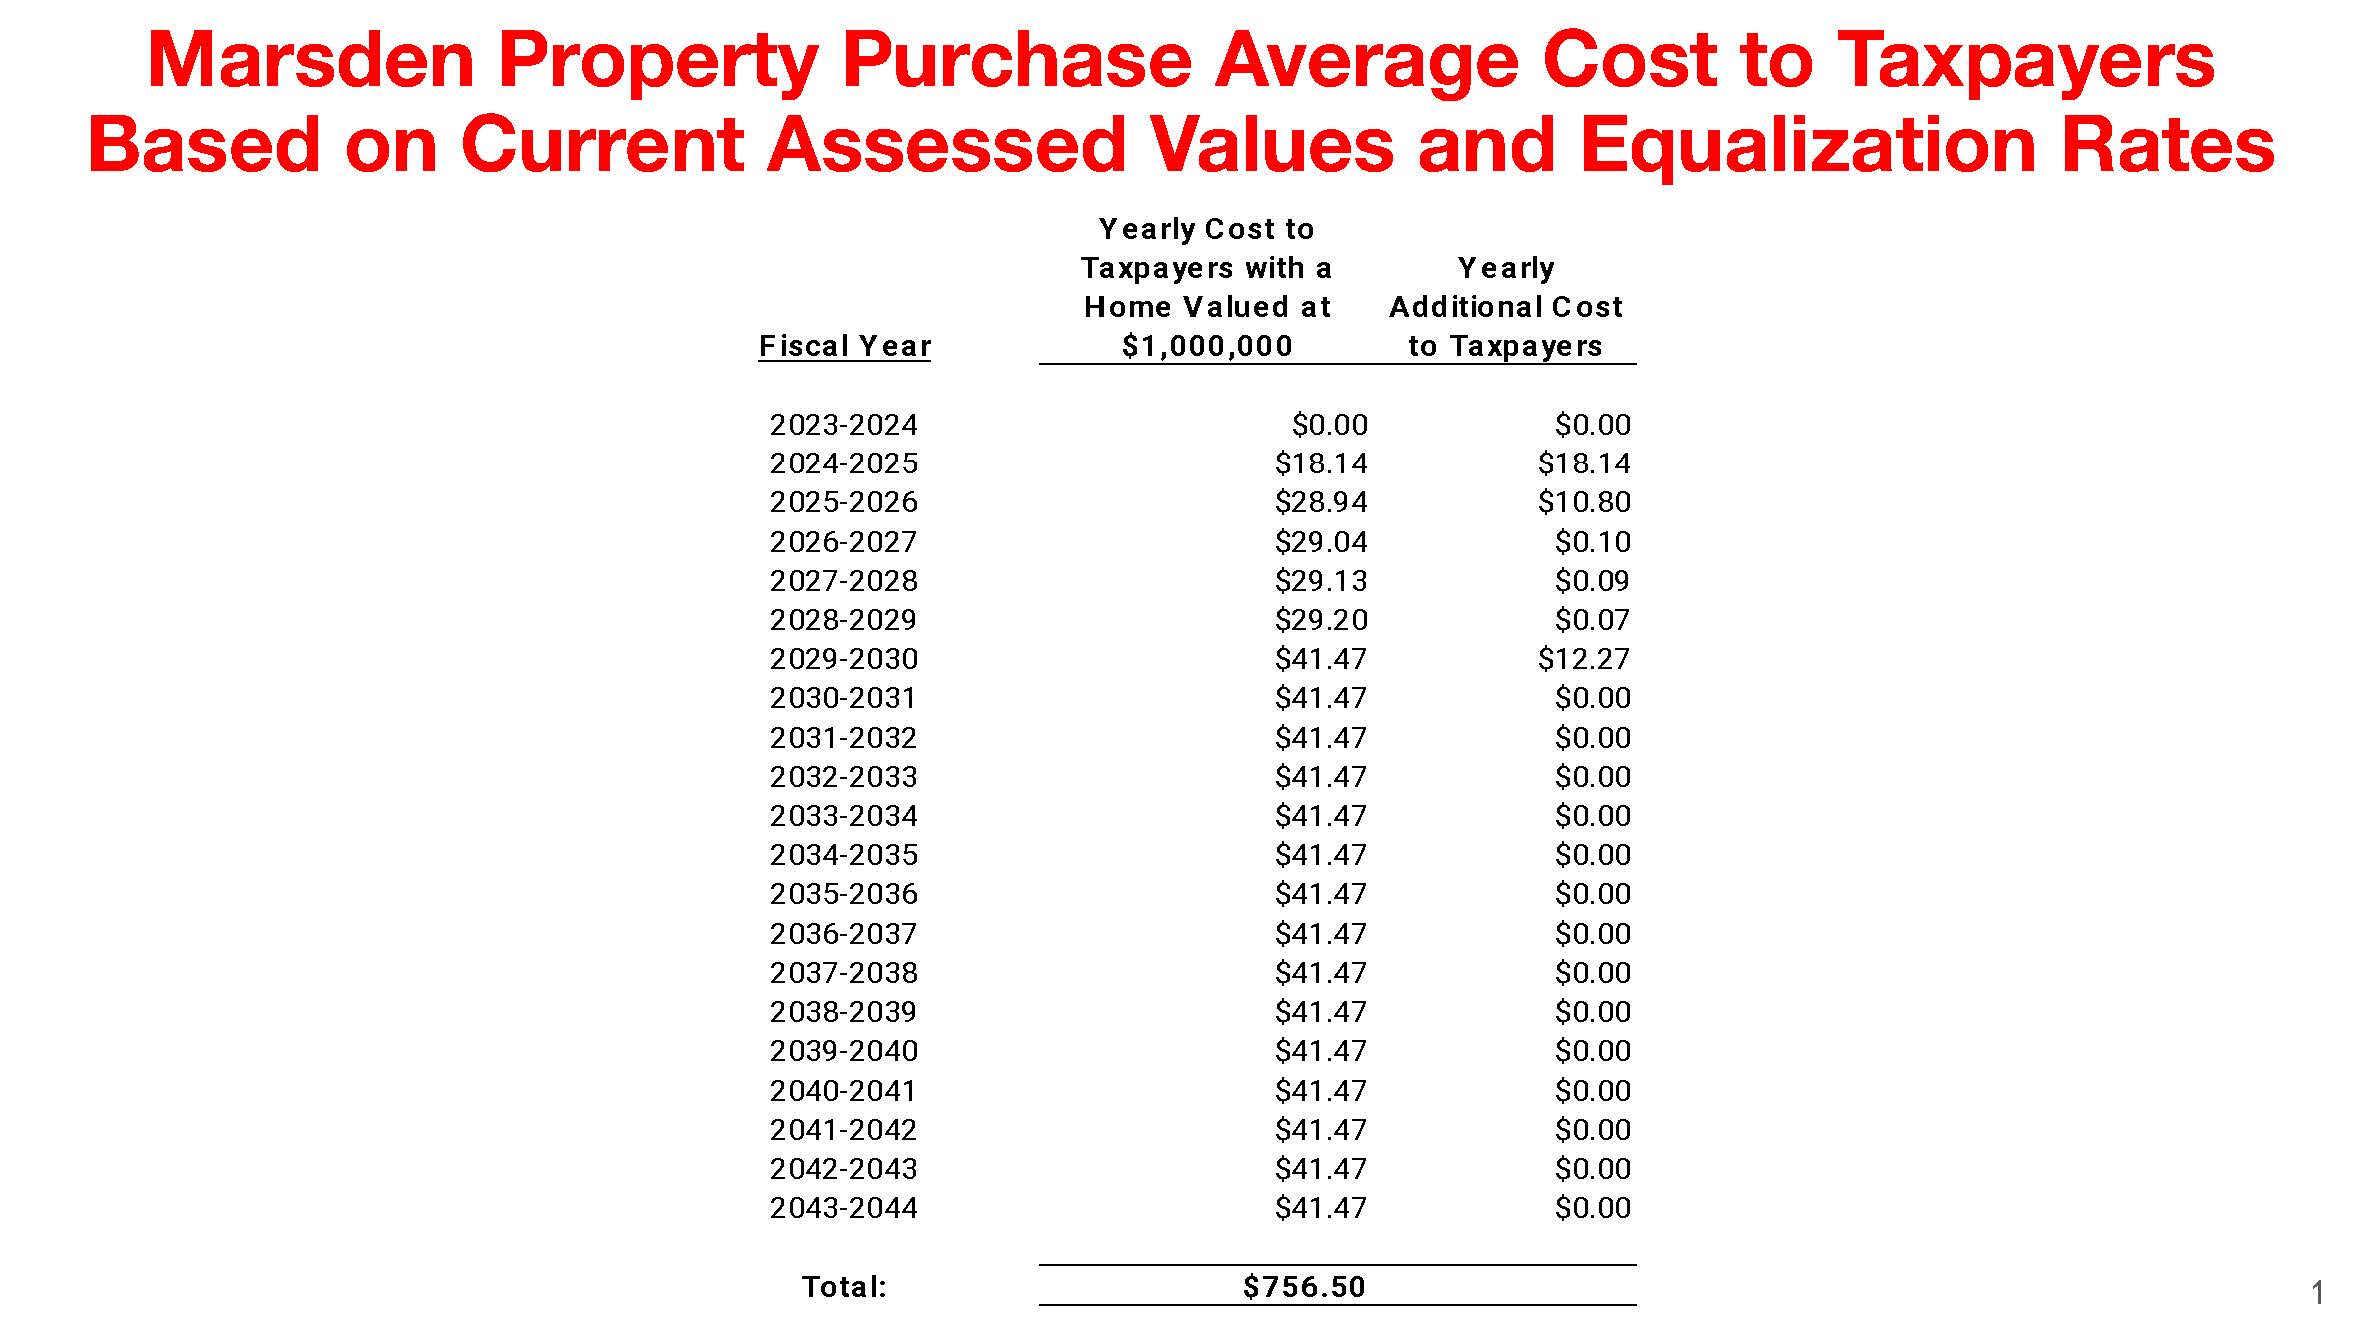 Marsden Property Purchase Average Cost to Taxpayers Based on Current Assessed Values and Equalization Rates